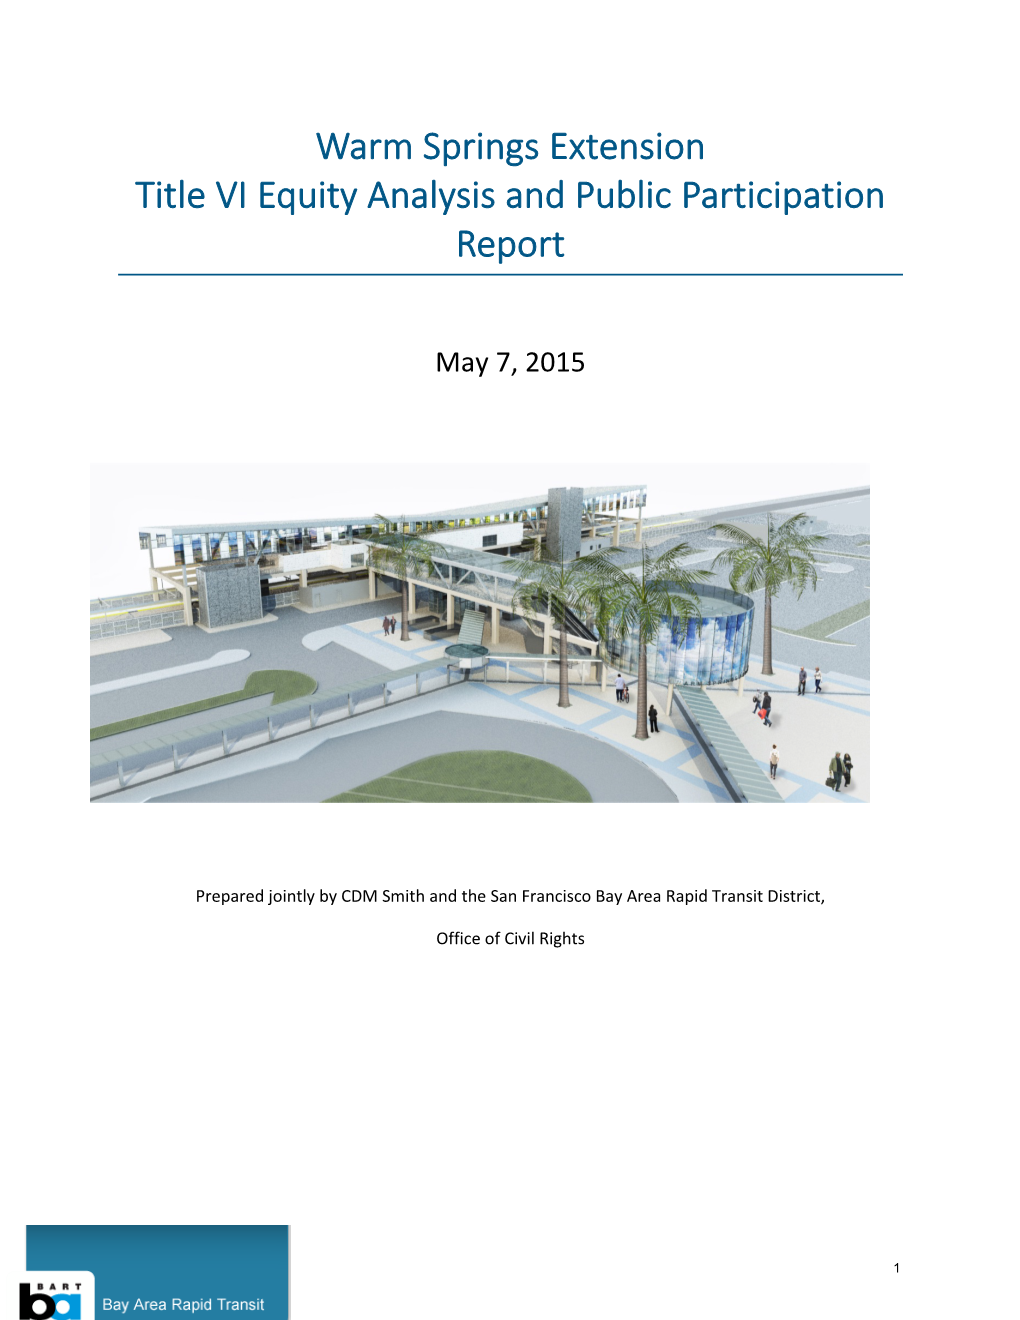 Warm Springs Extension Title VI Equity Analysis and Public Participation Report